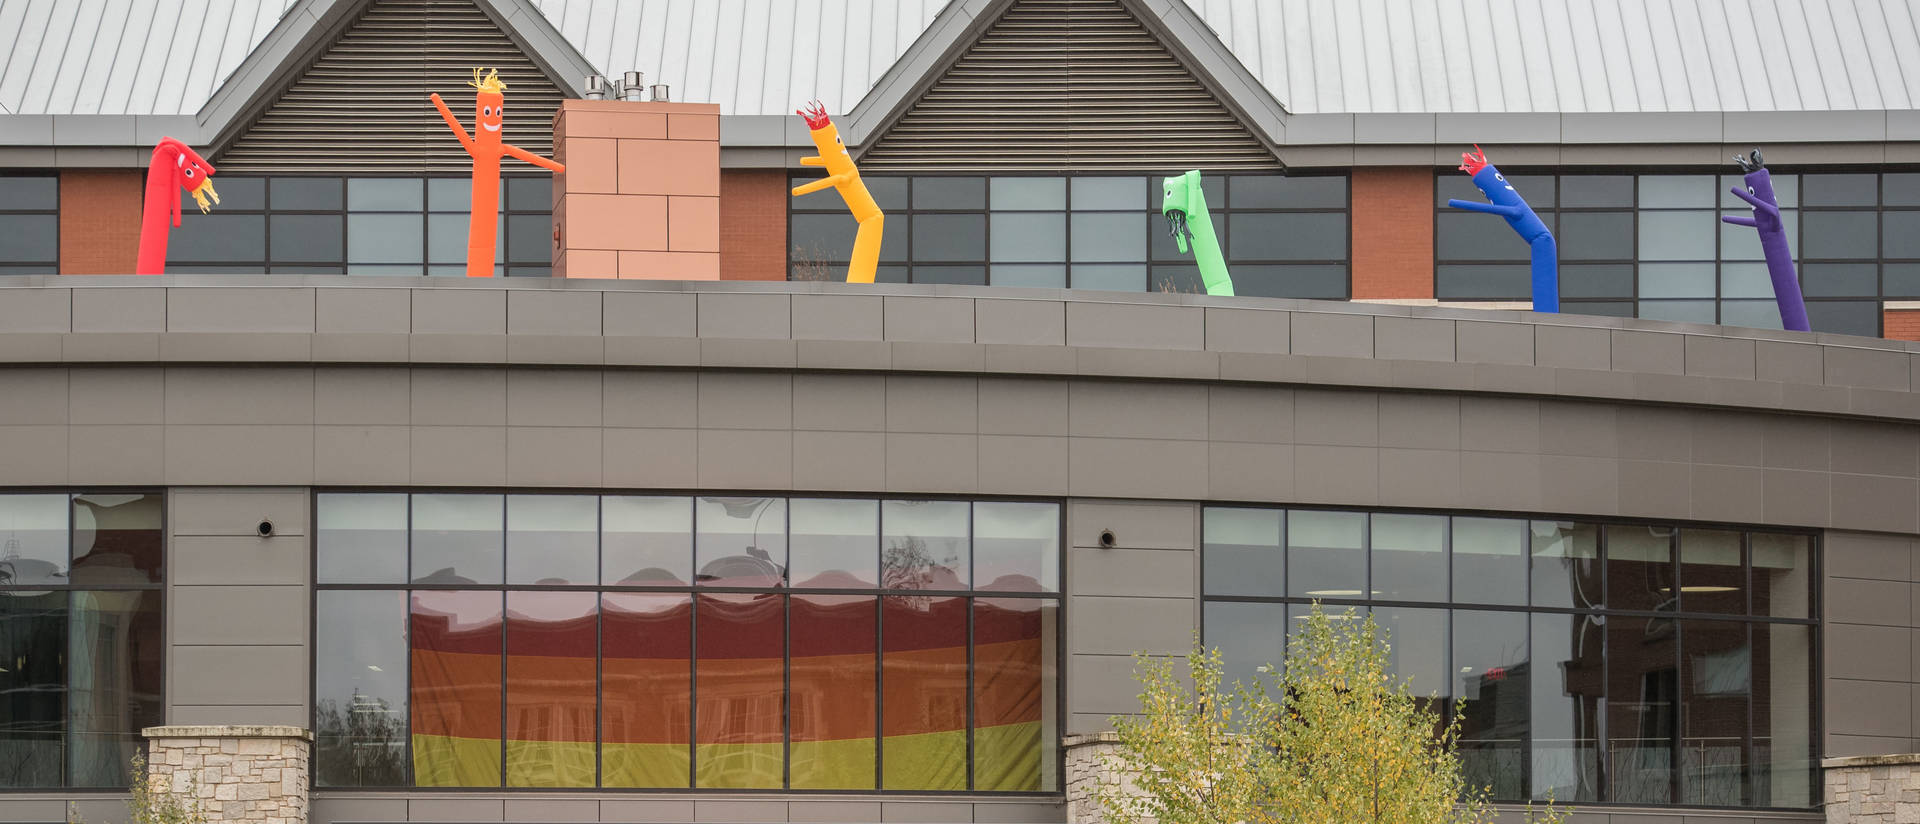 PRIDE flag and inflated people on Davies Center